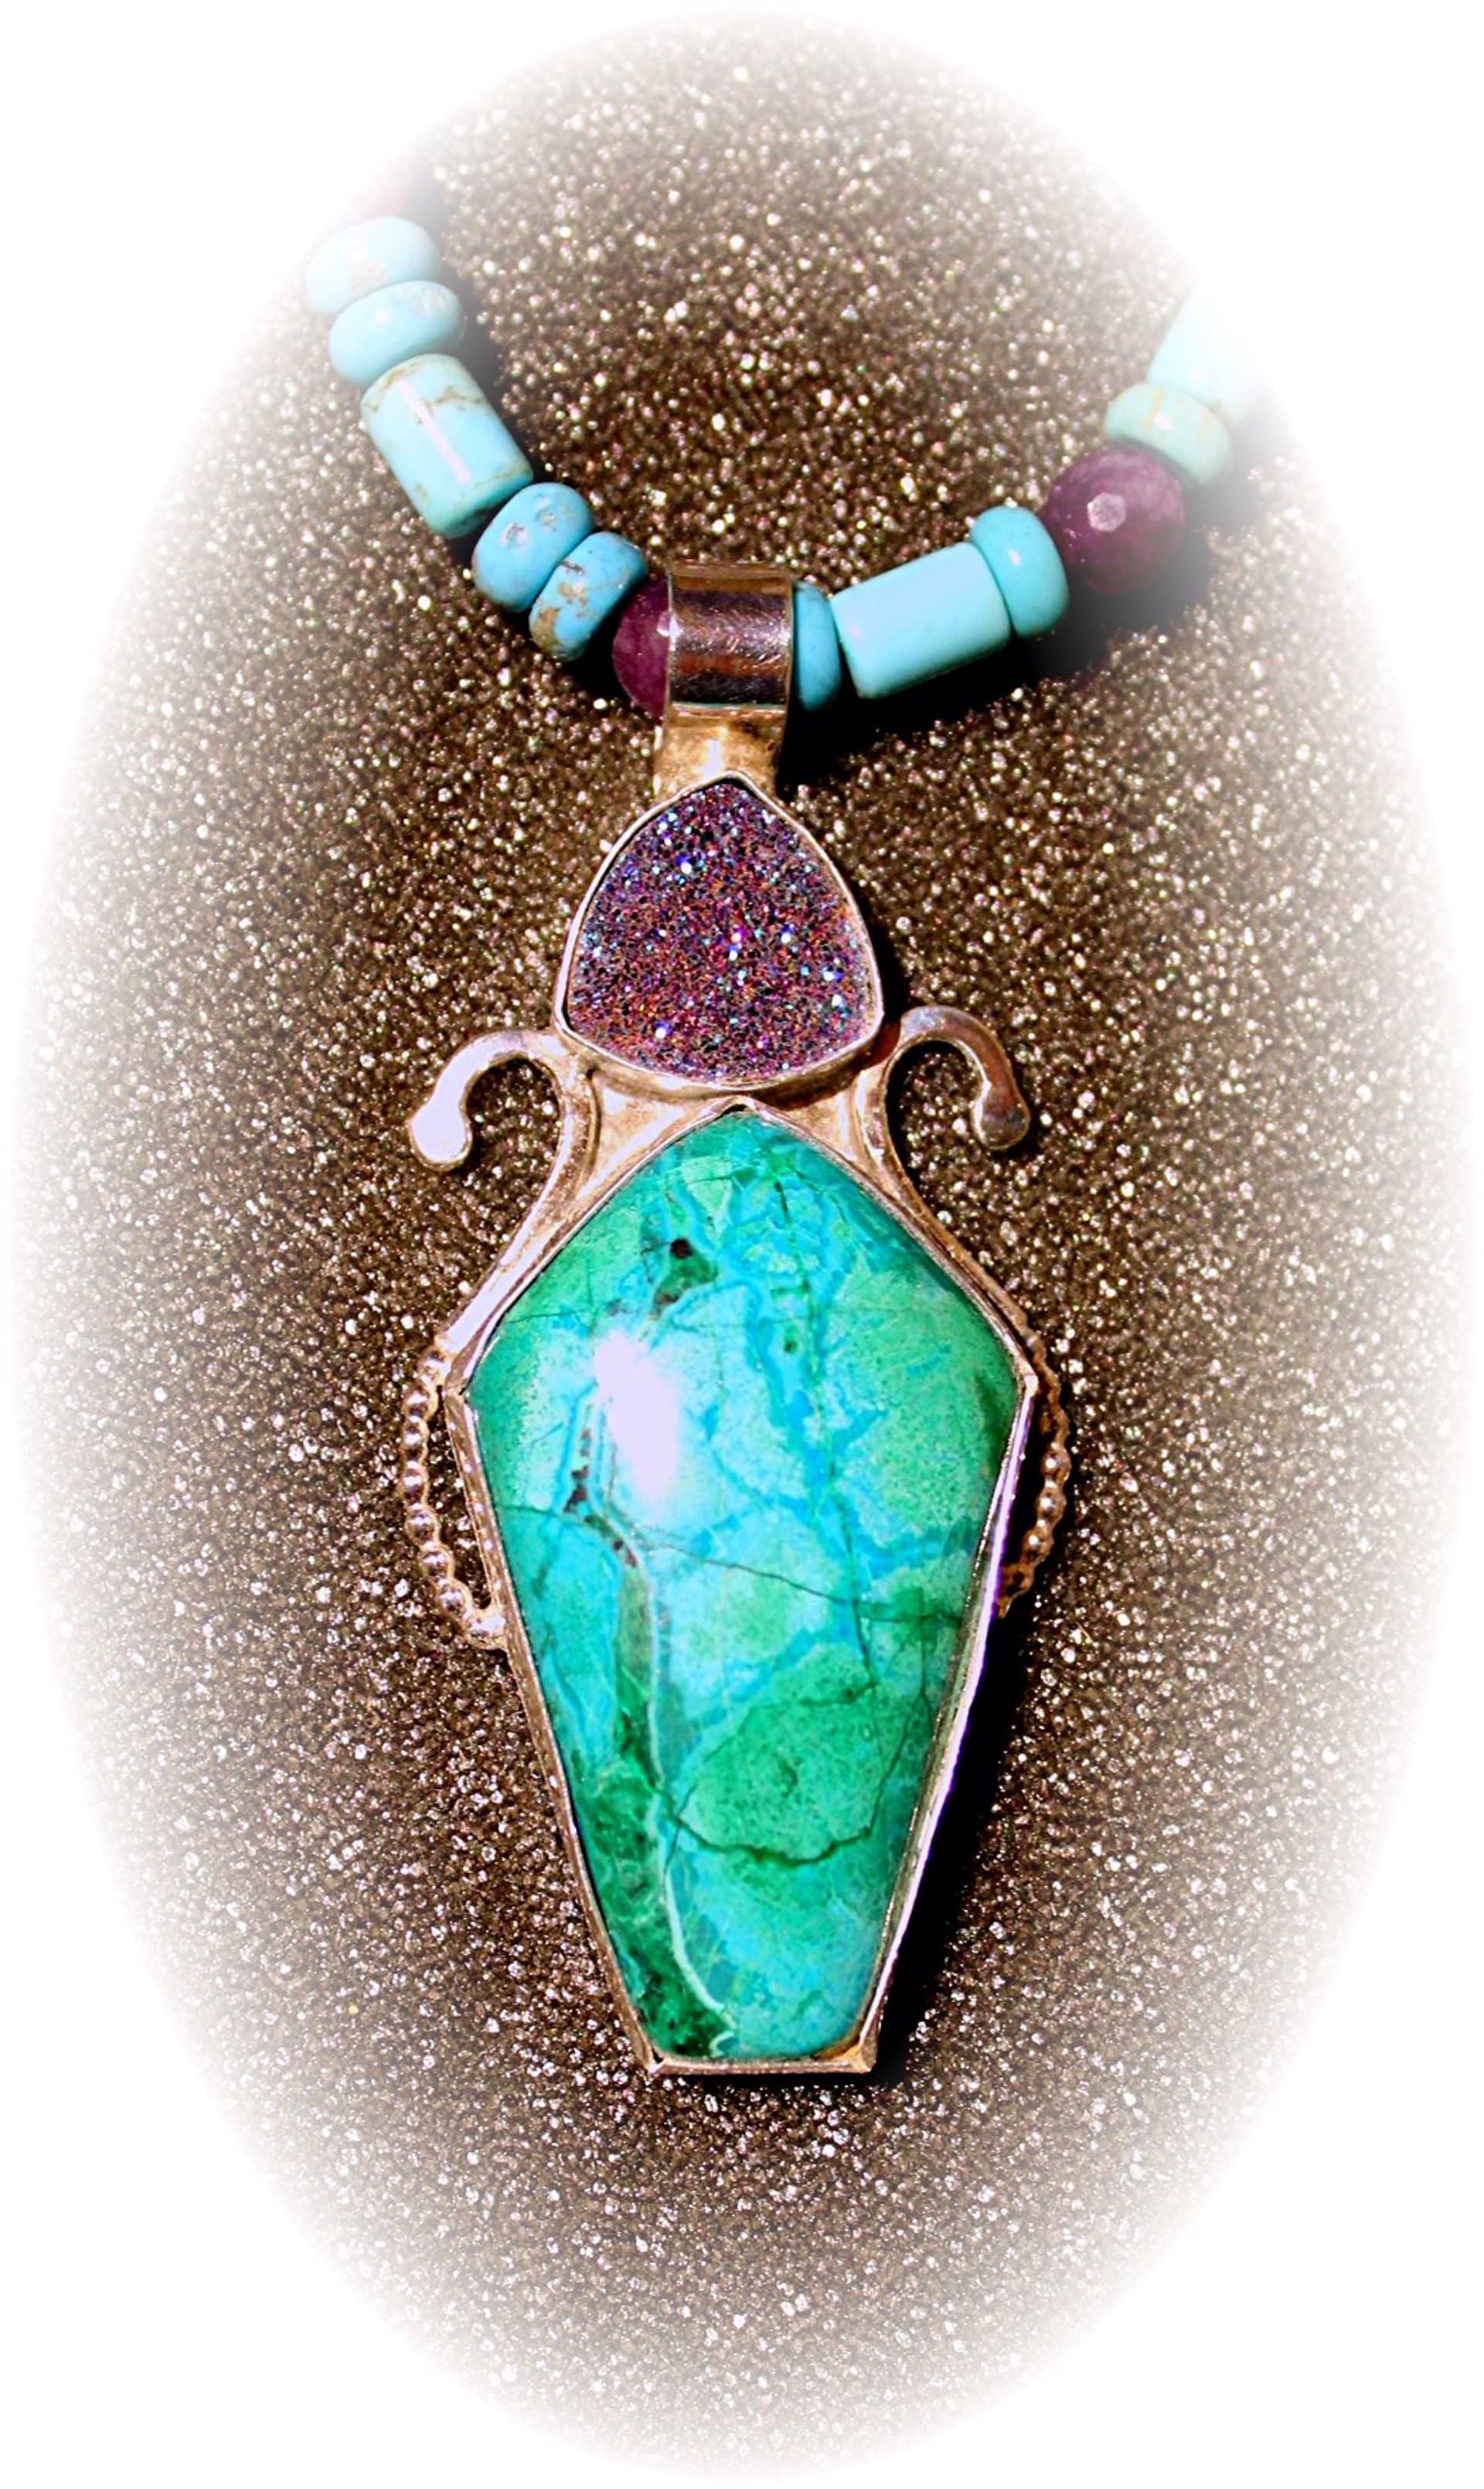 Turquoise+Druzy on turquoise+amethyst by Michael Redhawk